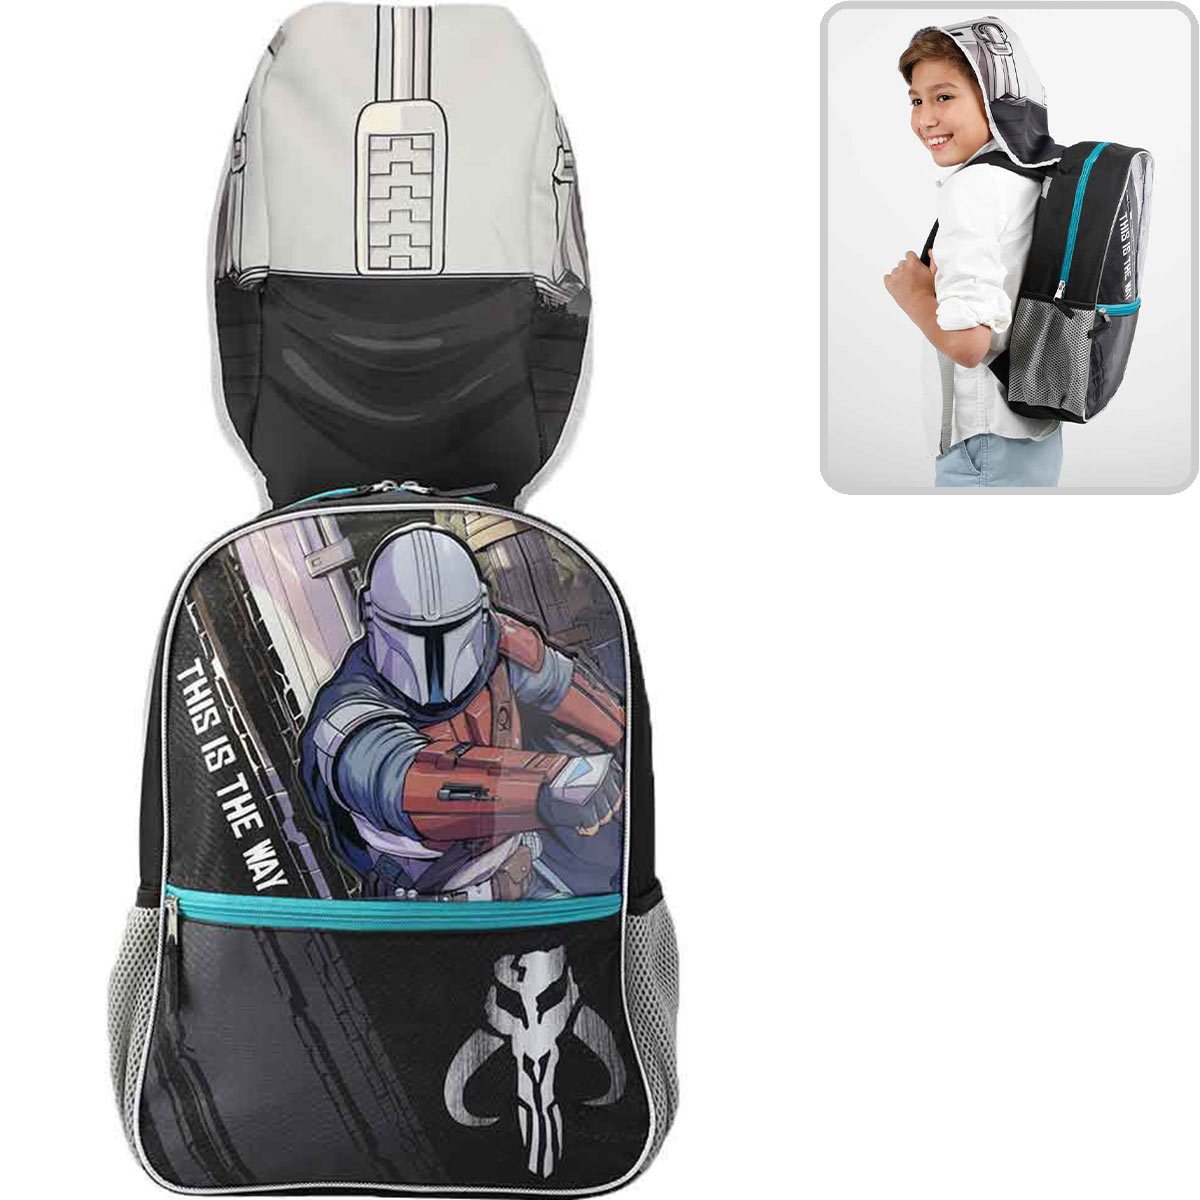 Star Wars Rolling Backpack with Bonus Lunch Case 